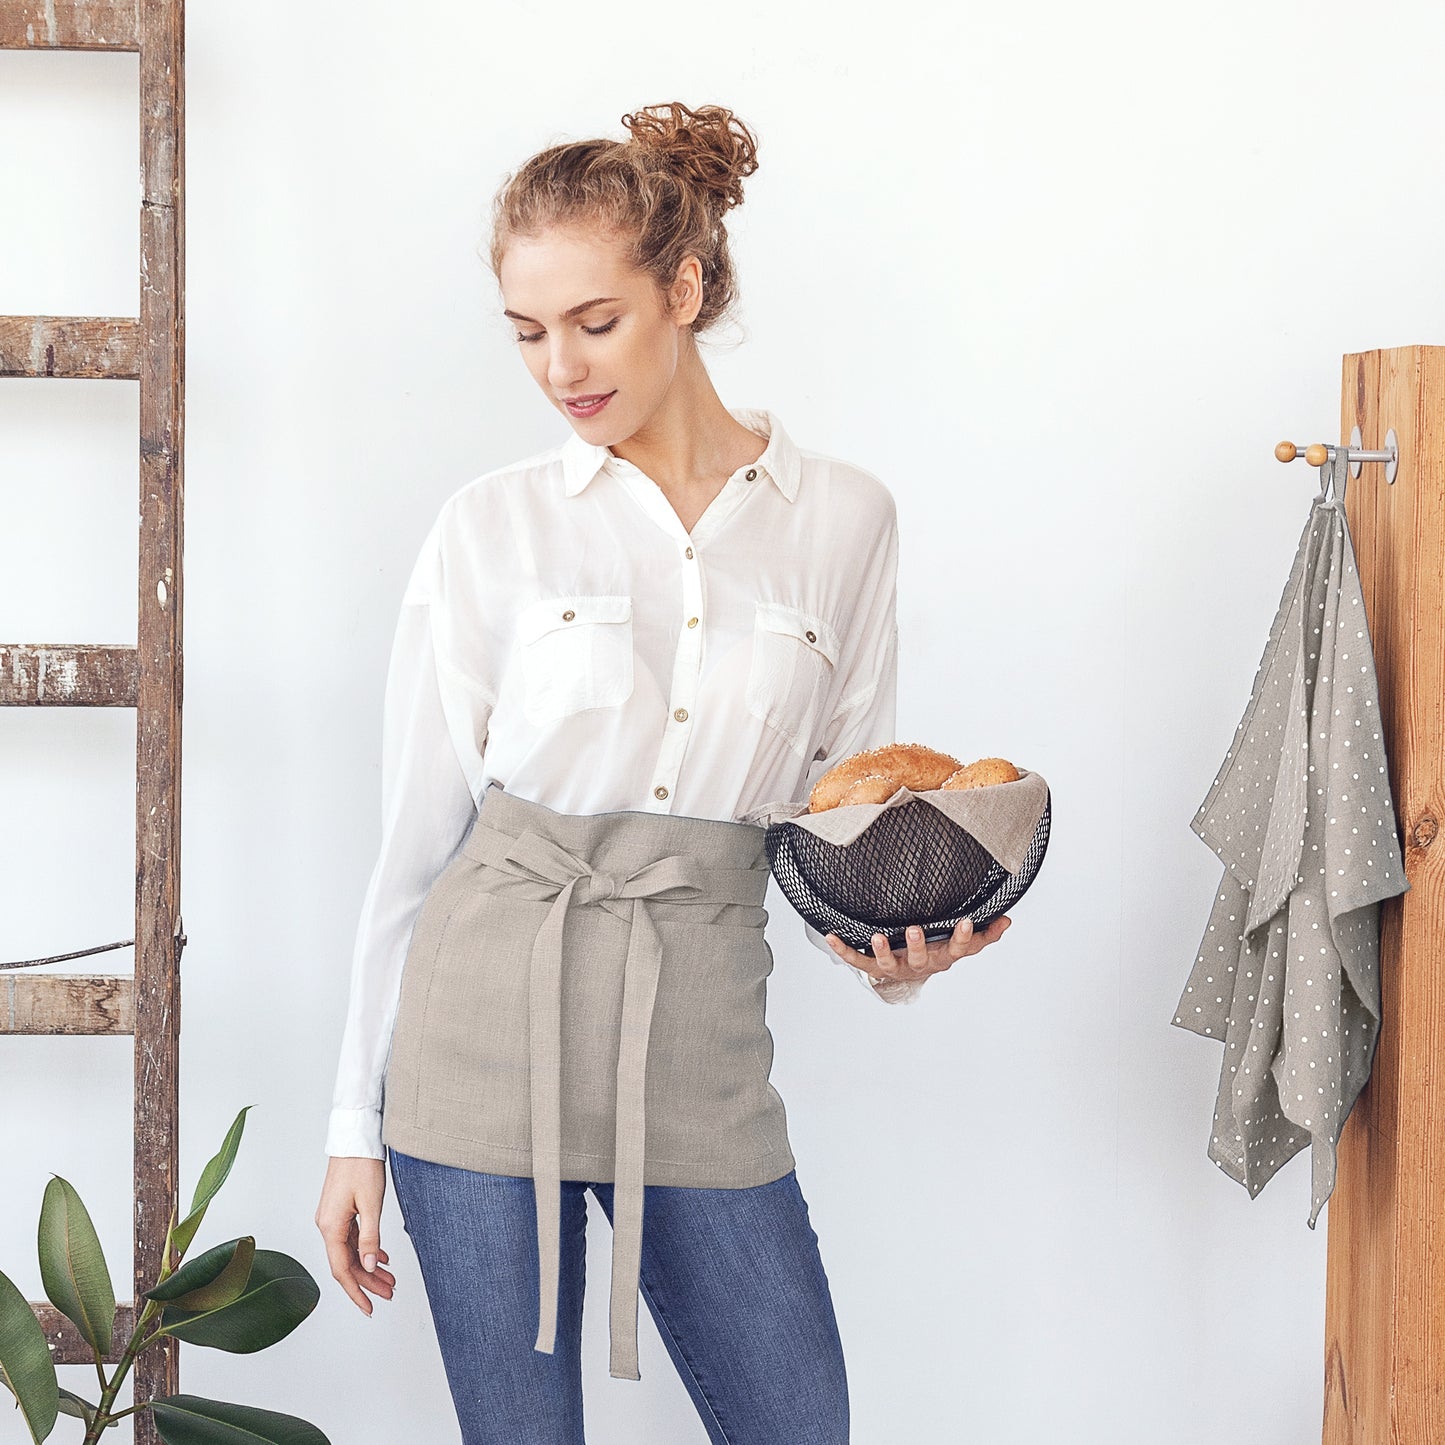 Natural Linen Apron with pockets | Half Apron for Men and Women, Adjustable Ties